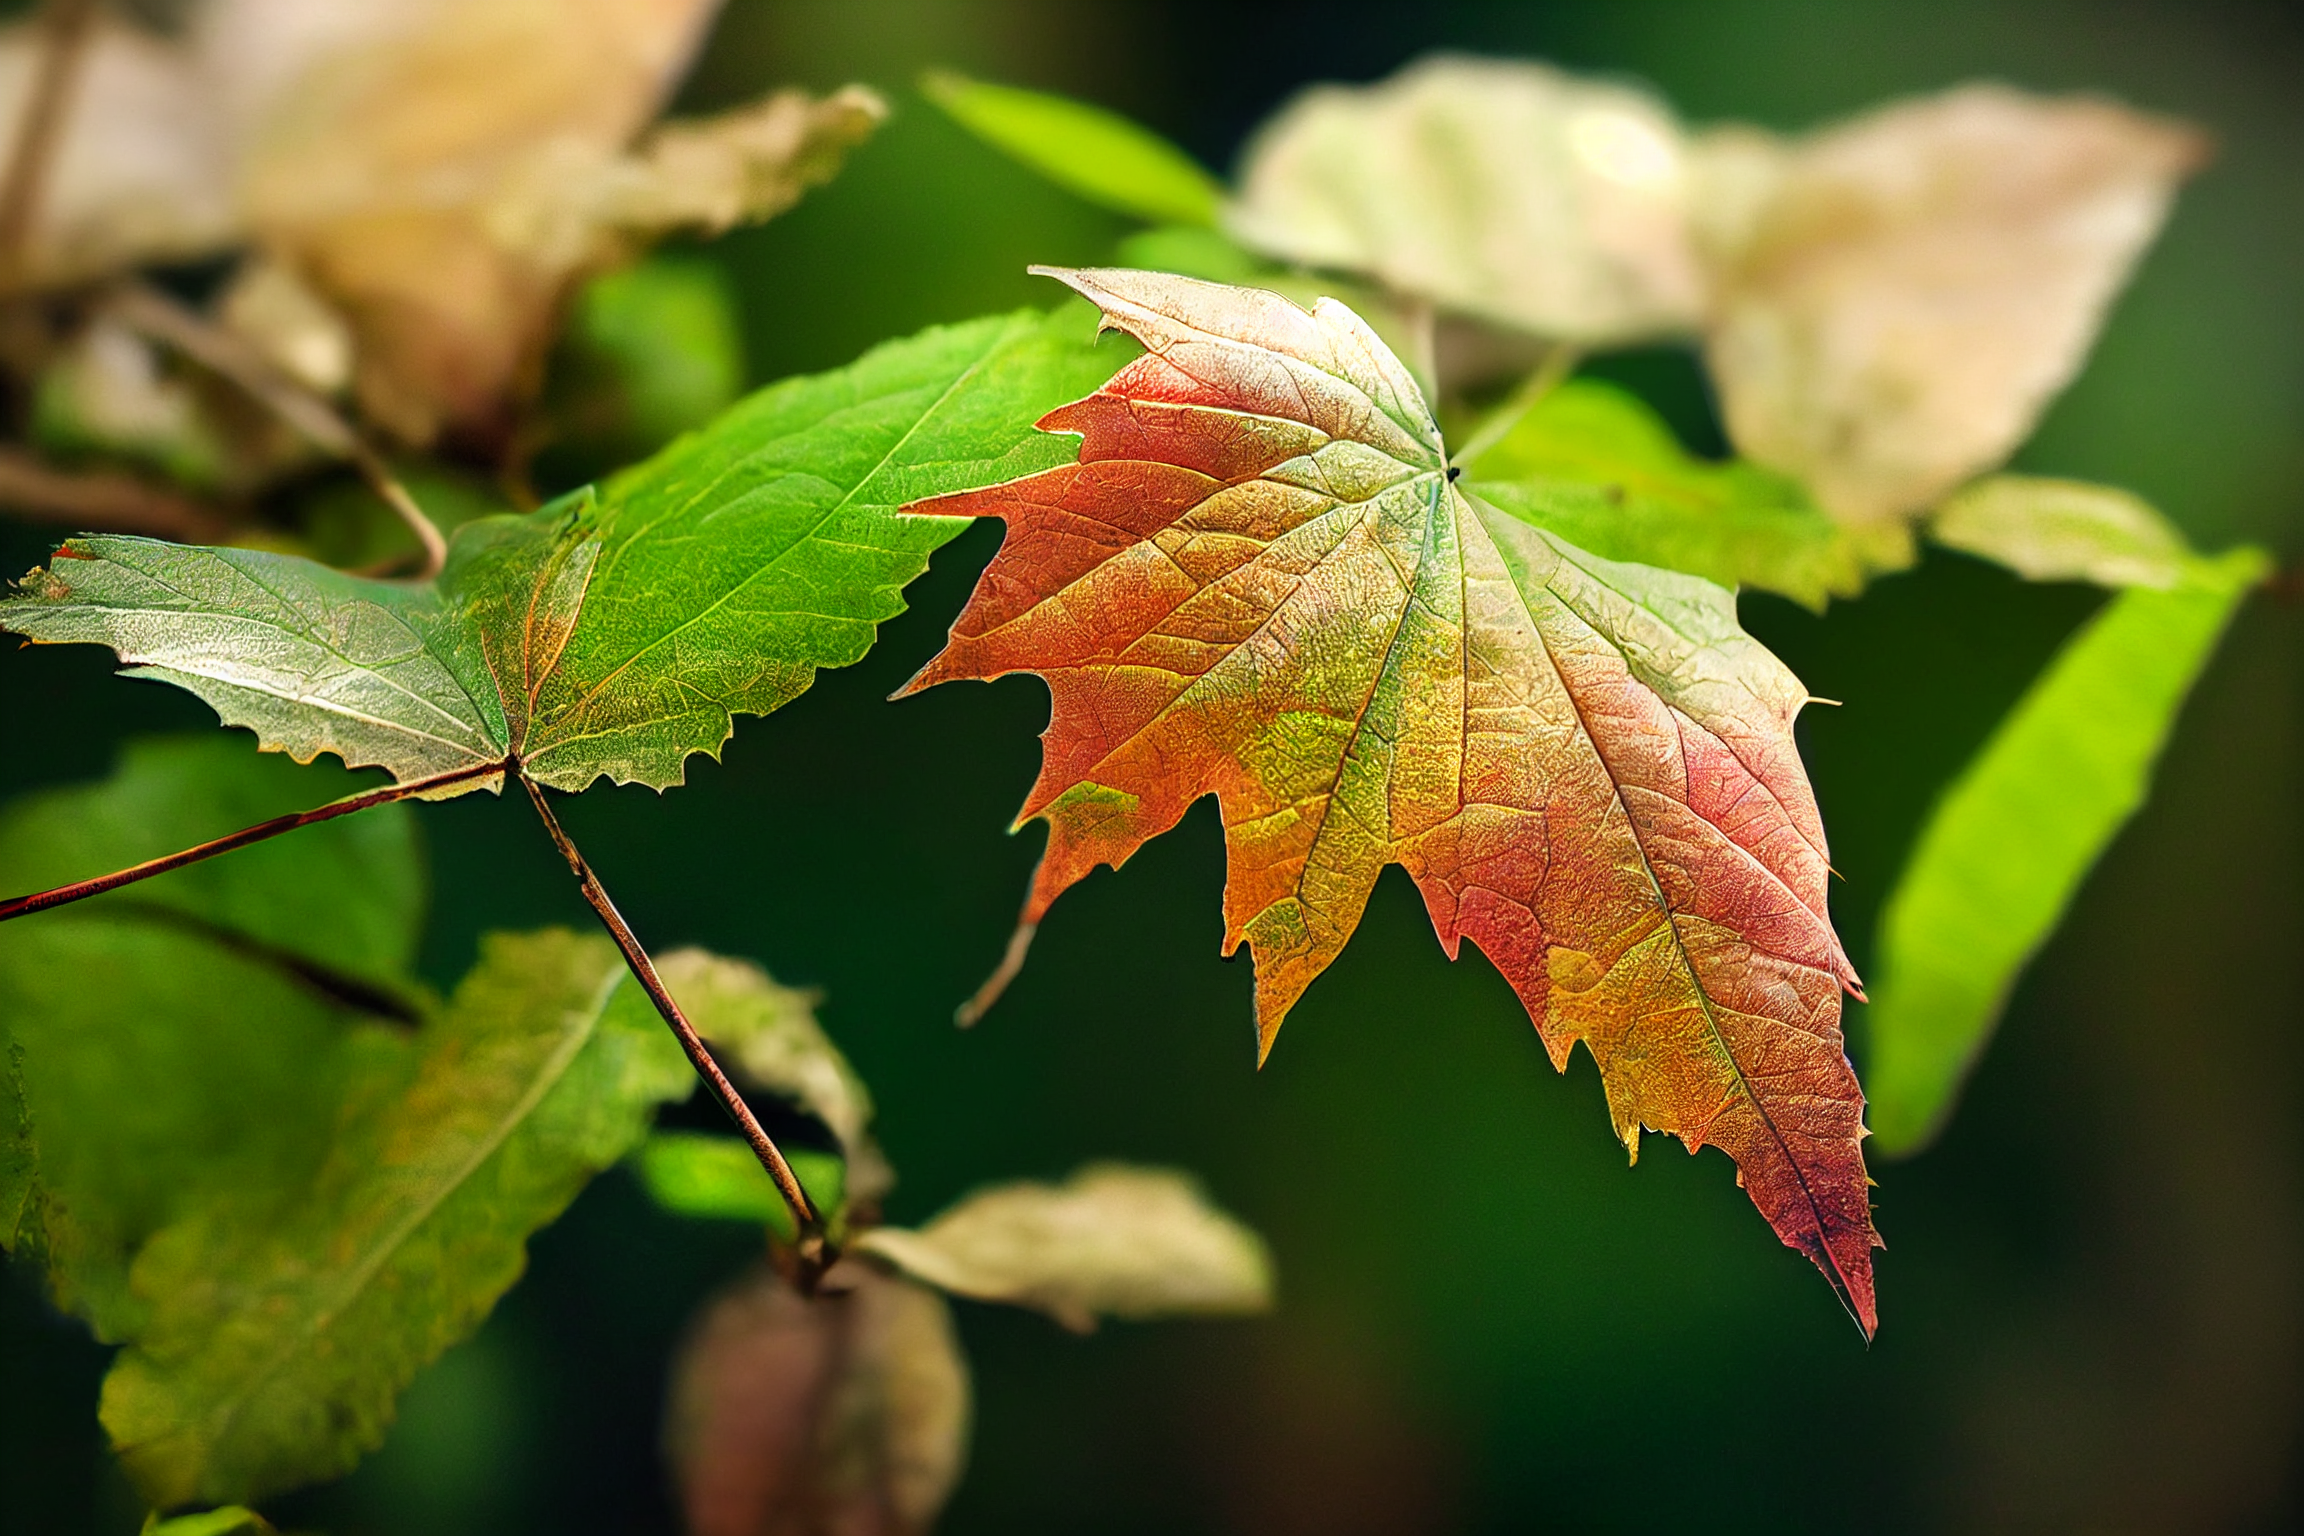 I’ve changed for the better this time – Leafpunk red and green leaves